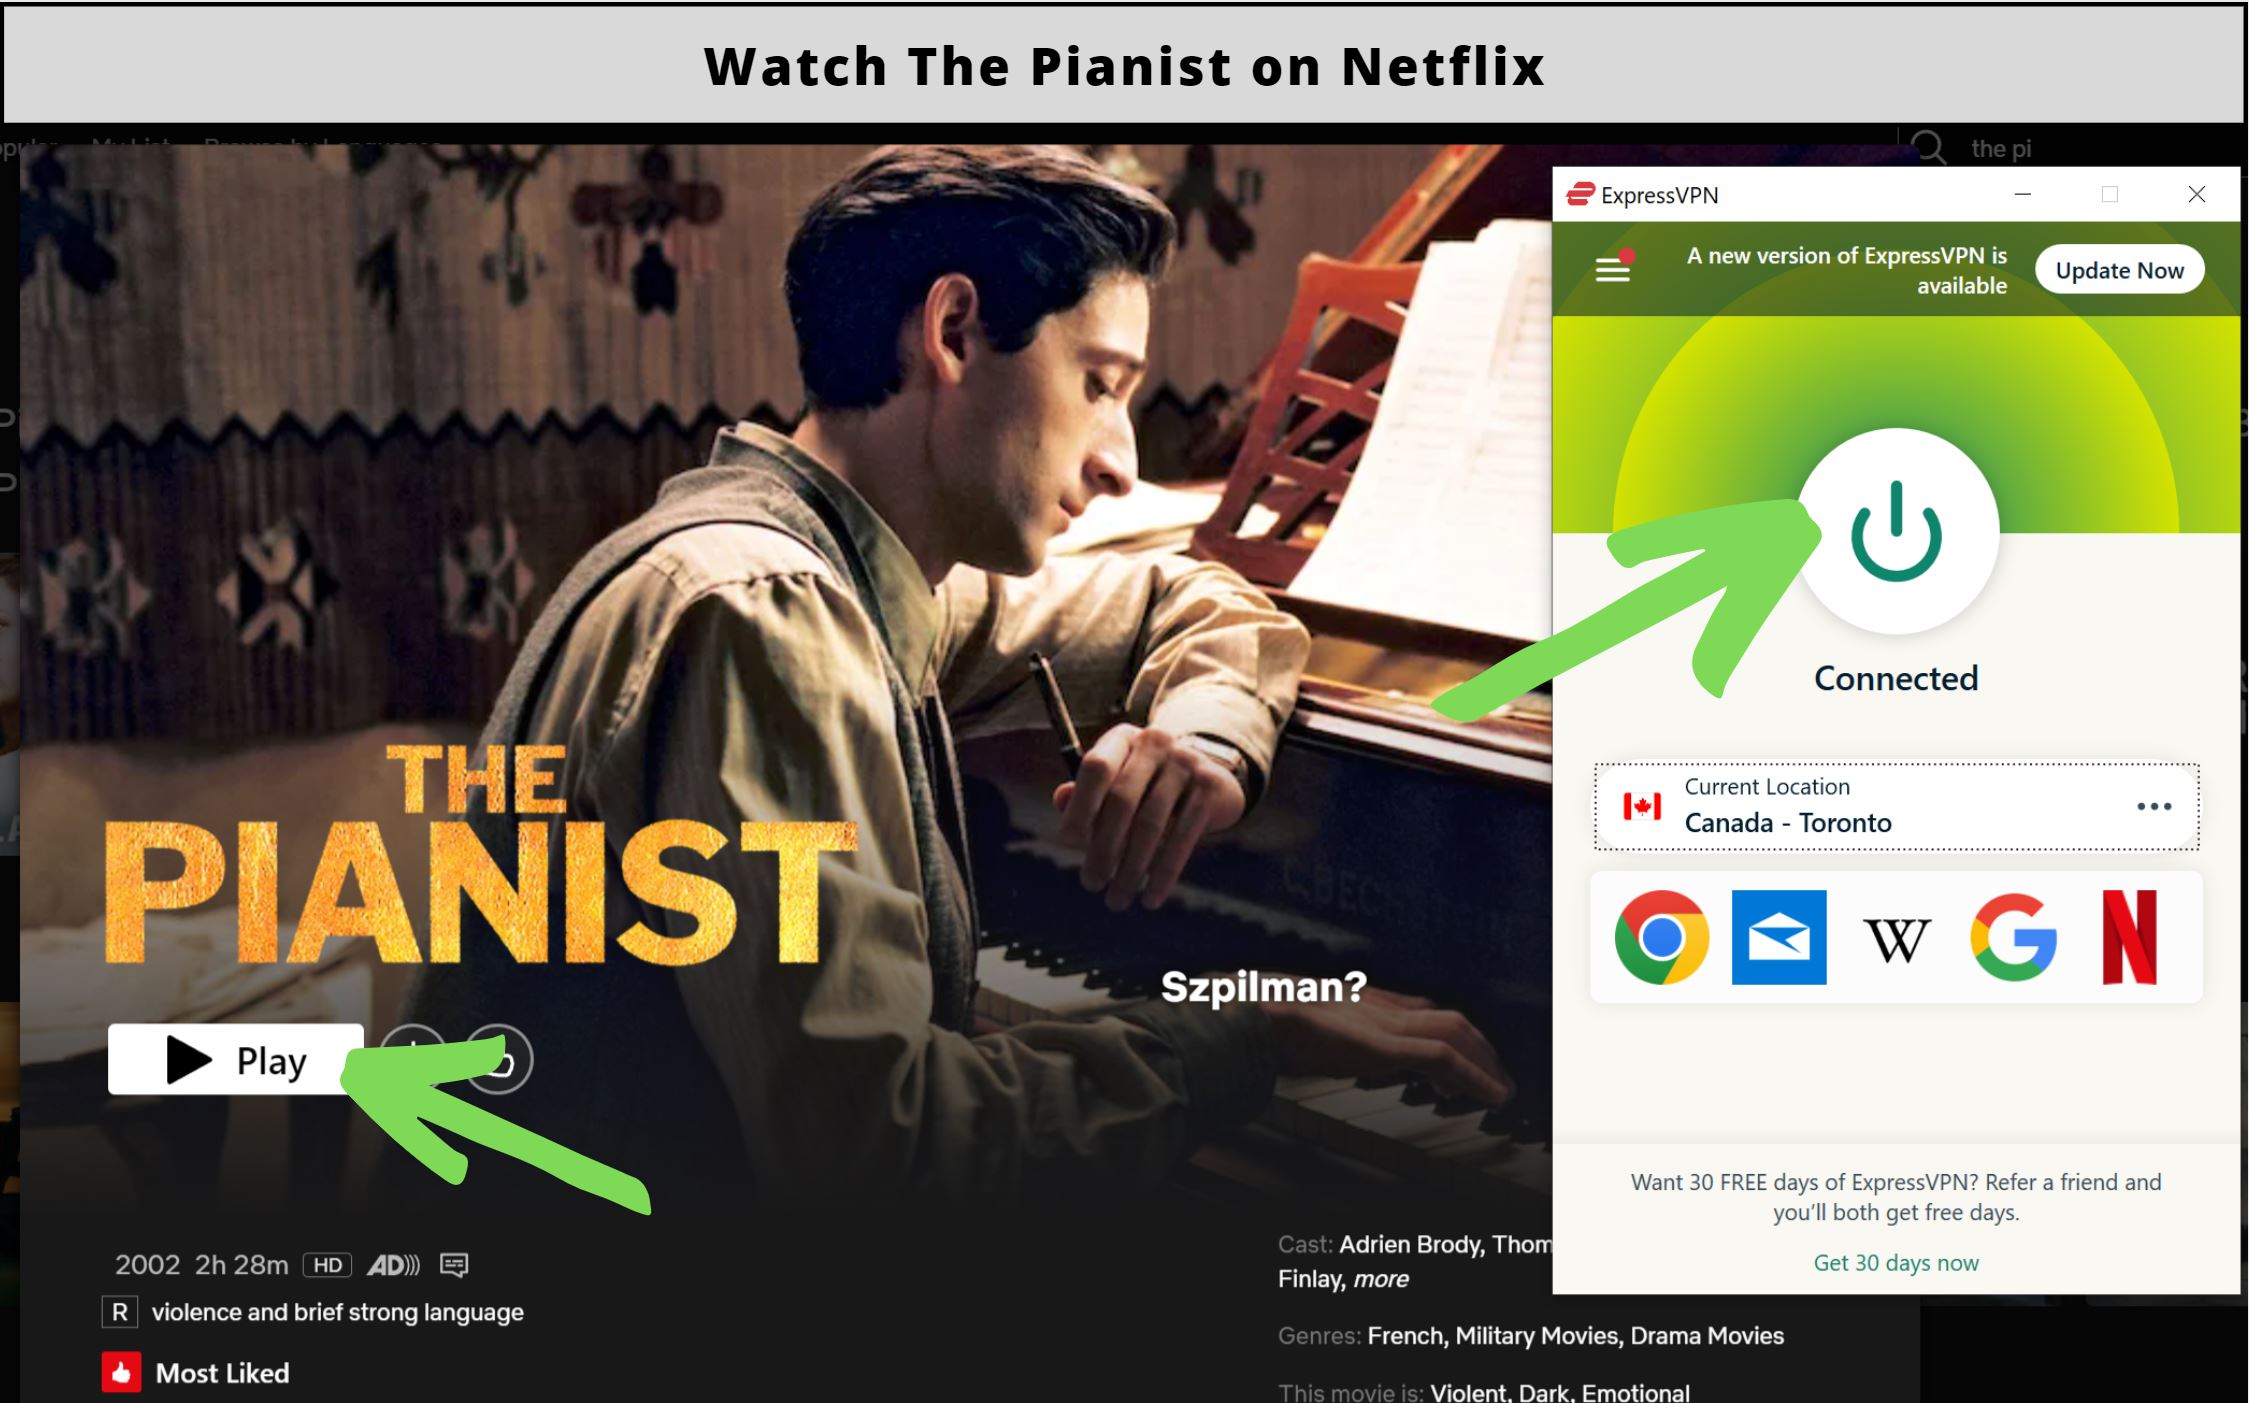 How to watch The Pianist on Netflix